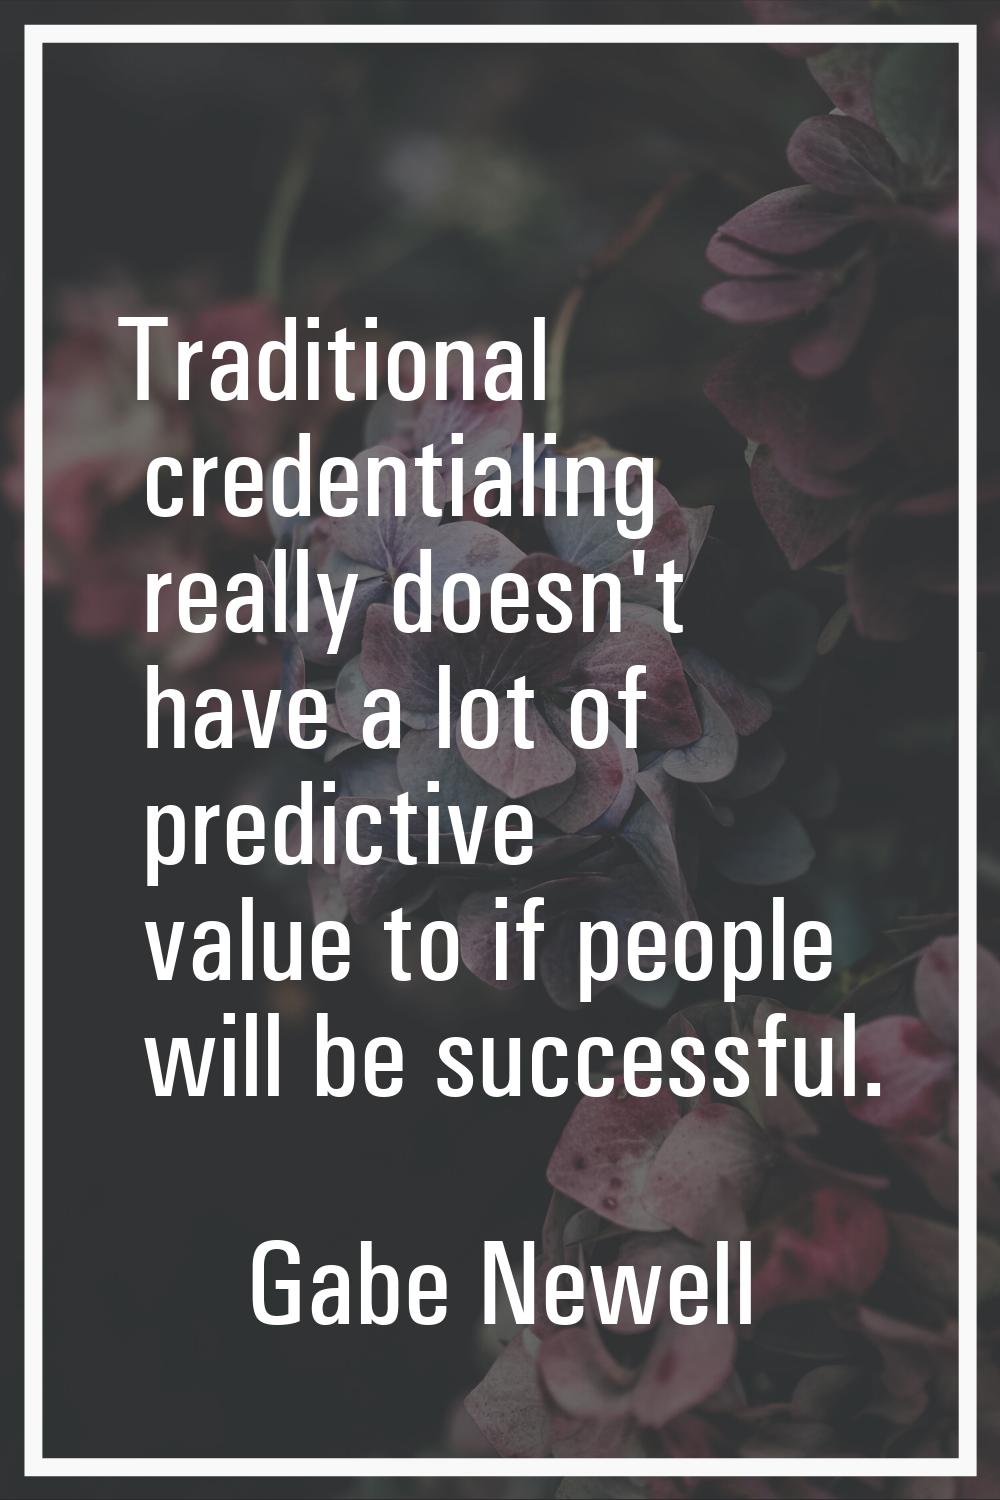 Traditional credentialing really doesn't have a lot of predictive value to if people will be succes